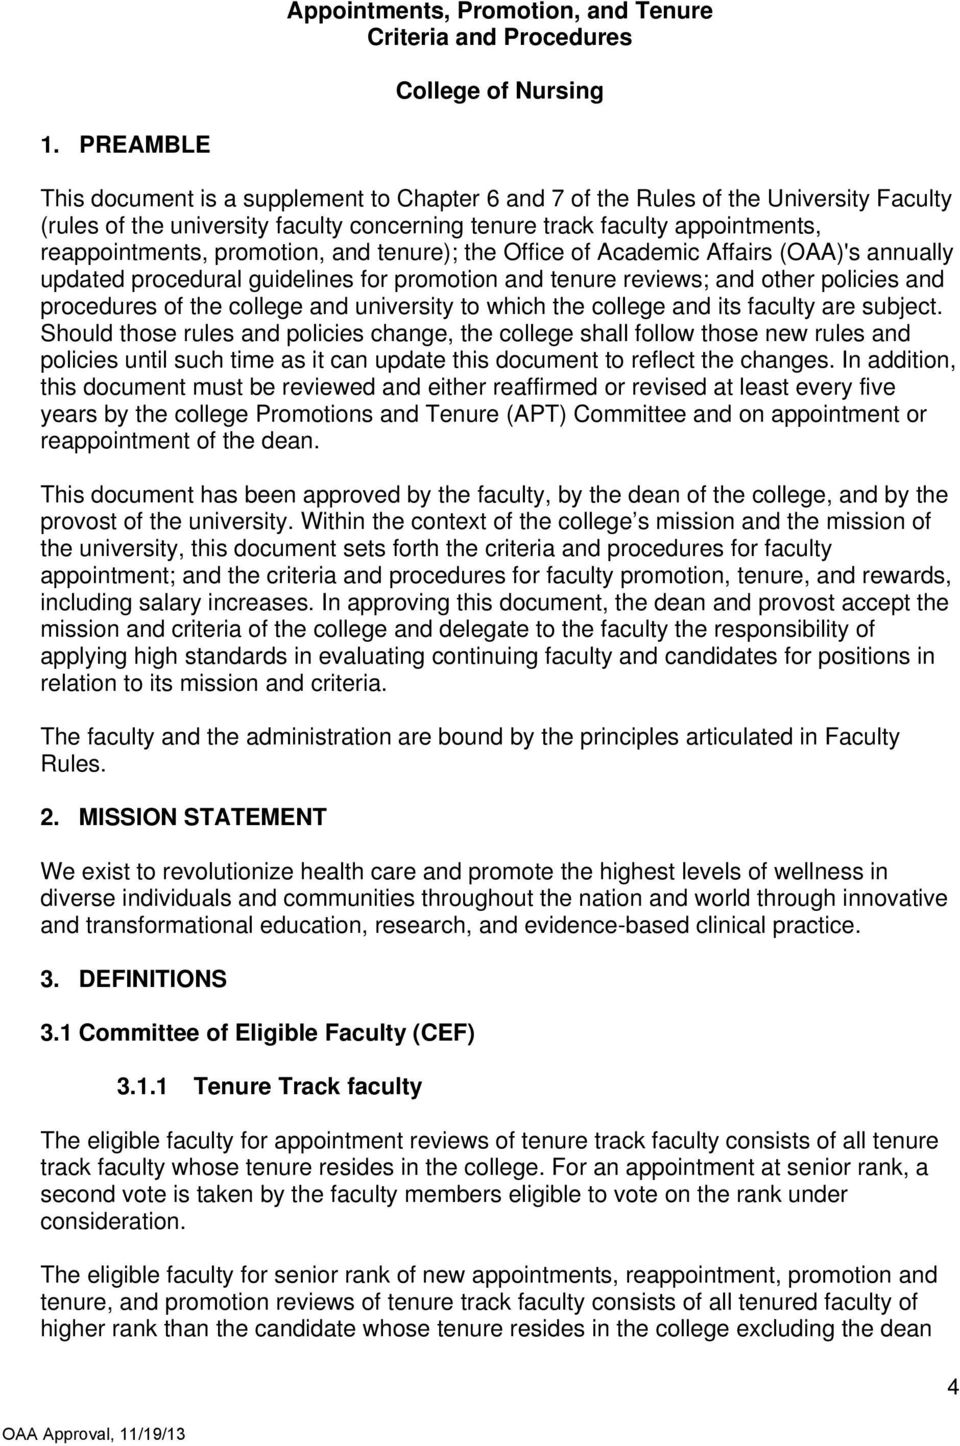 promotion, and tenure); the Office of Academic Affairs (OAA)'s annually updated procedural guidelines for promotion and tenure reviews; and other policies and procedures of the college and university